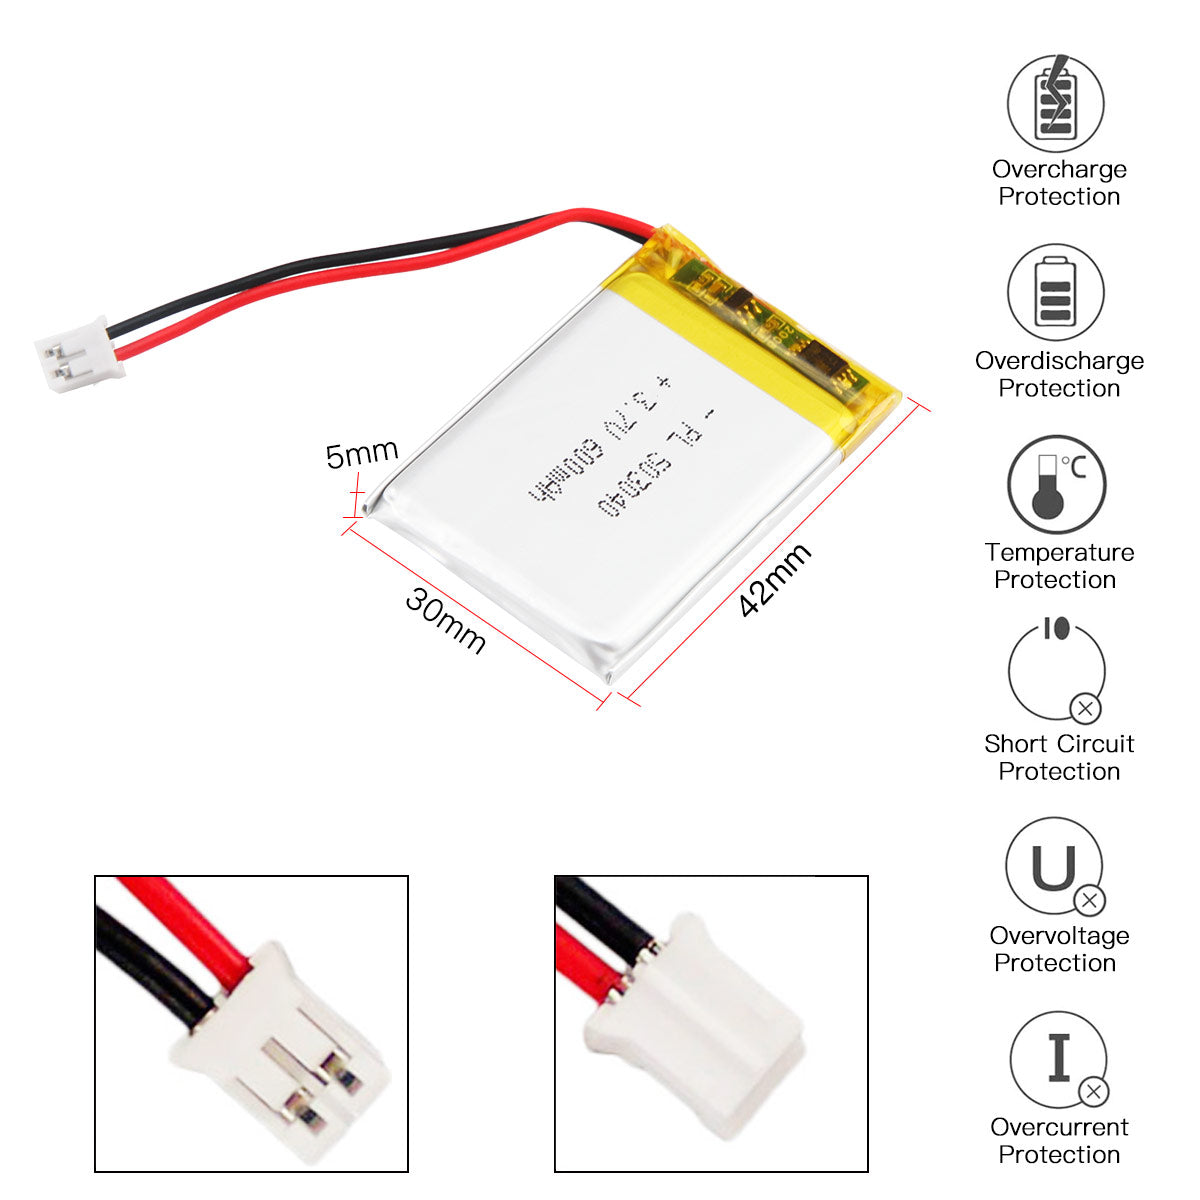 3.7V 600mAh 503040 Rechargeable Lithium Polymer Battery Length 42mm